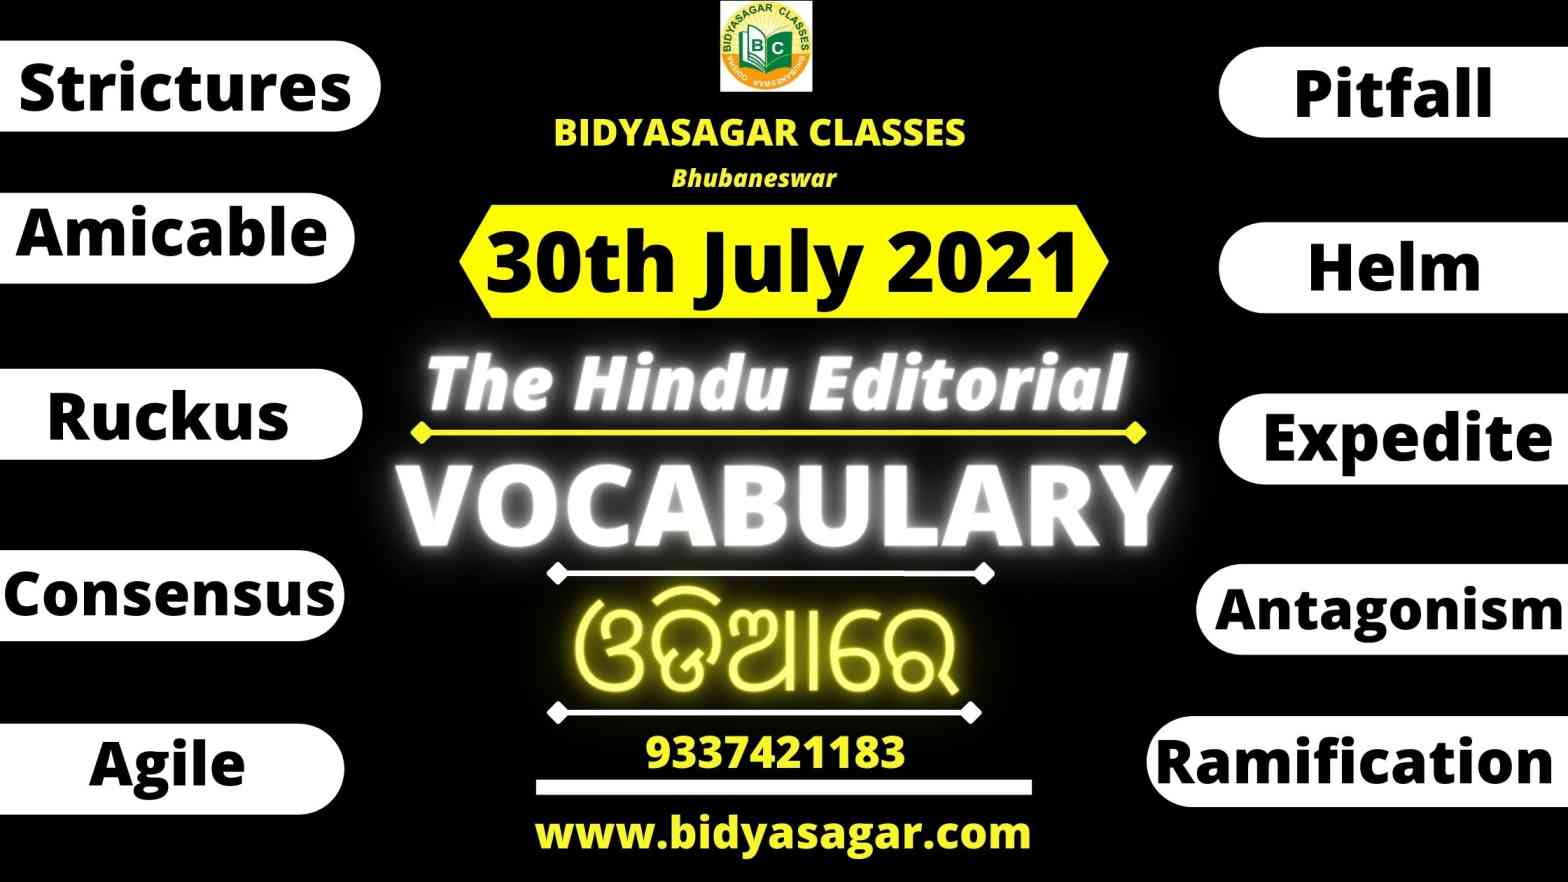 The Hindu Editorial Vocabulary of 30th July 2021